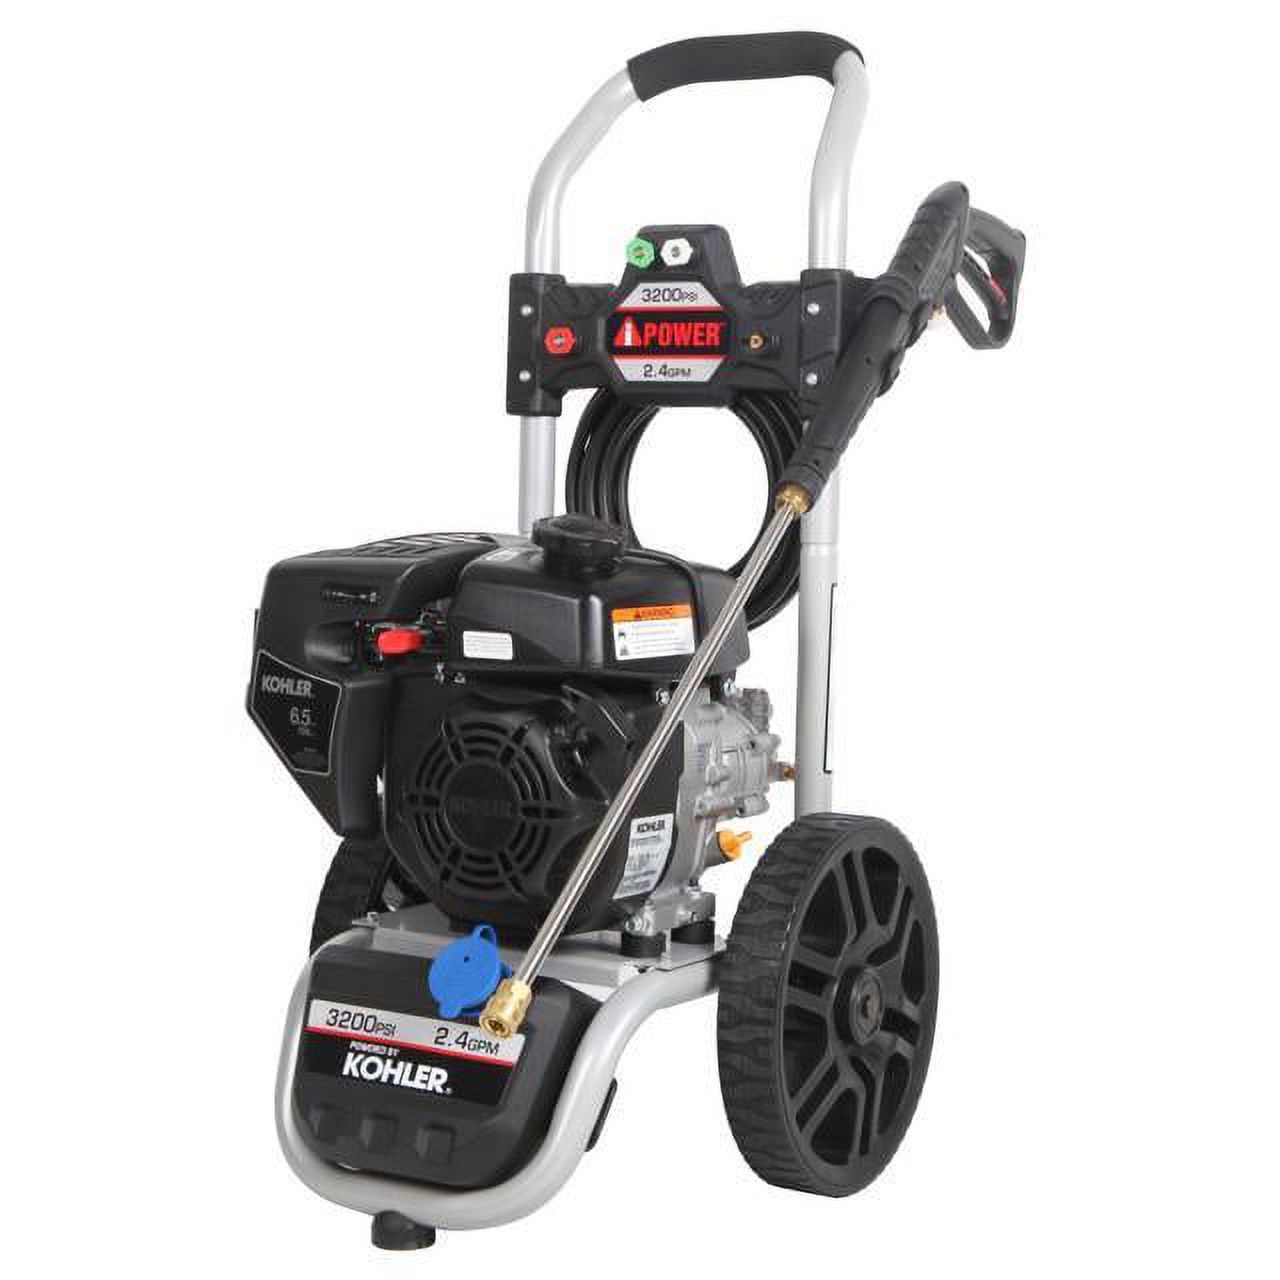 A-IPOWER Power Pressure Washer 3200 PSI Pressure Washer Kohler Engine 2.4 GPM APW3200KH - image 3 of 5